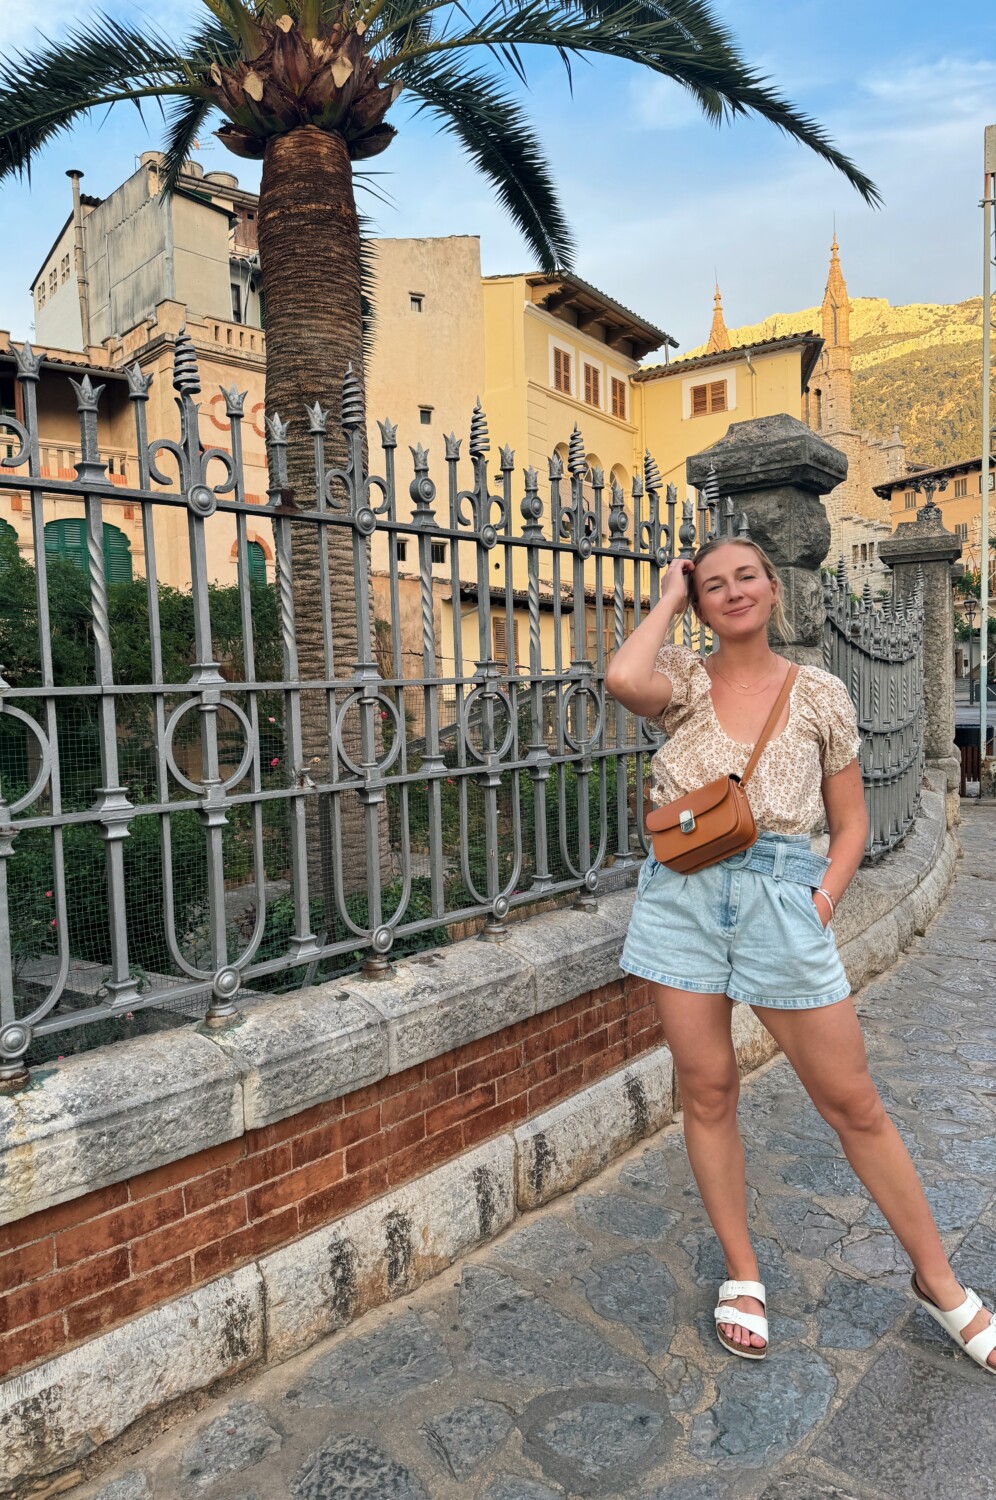 Ruth Nuss wearing belted denim shorts and afloral top in Soller, Mallorca